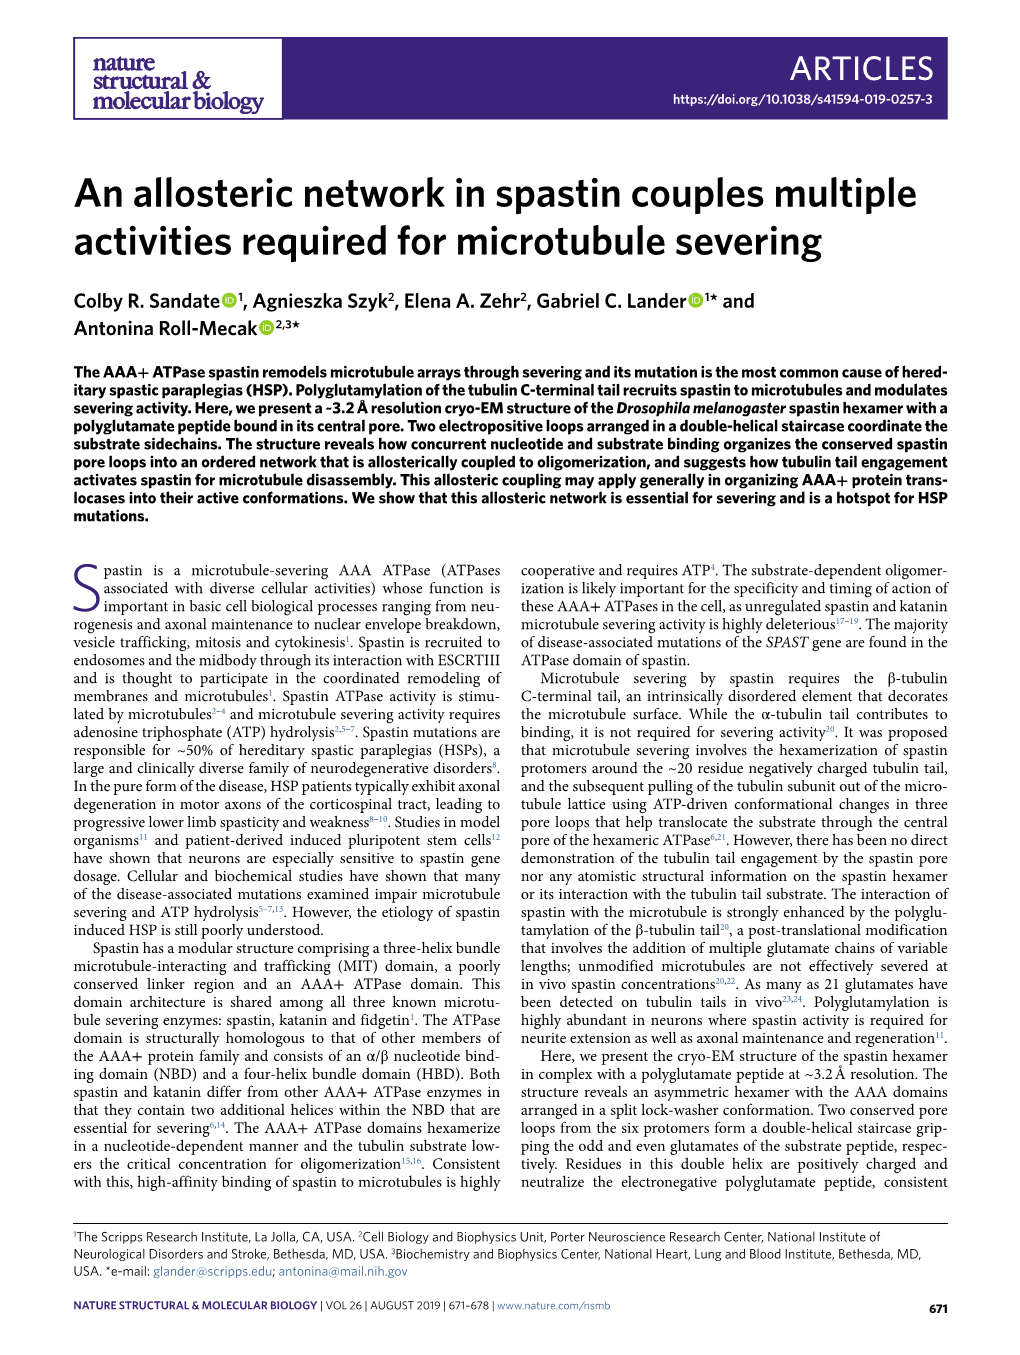 An Allosteric Network in Spastin Couples Multiple Activities Required for Microtubule Severing